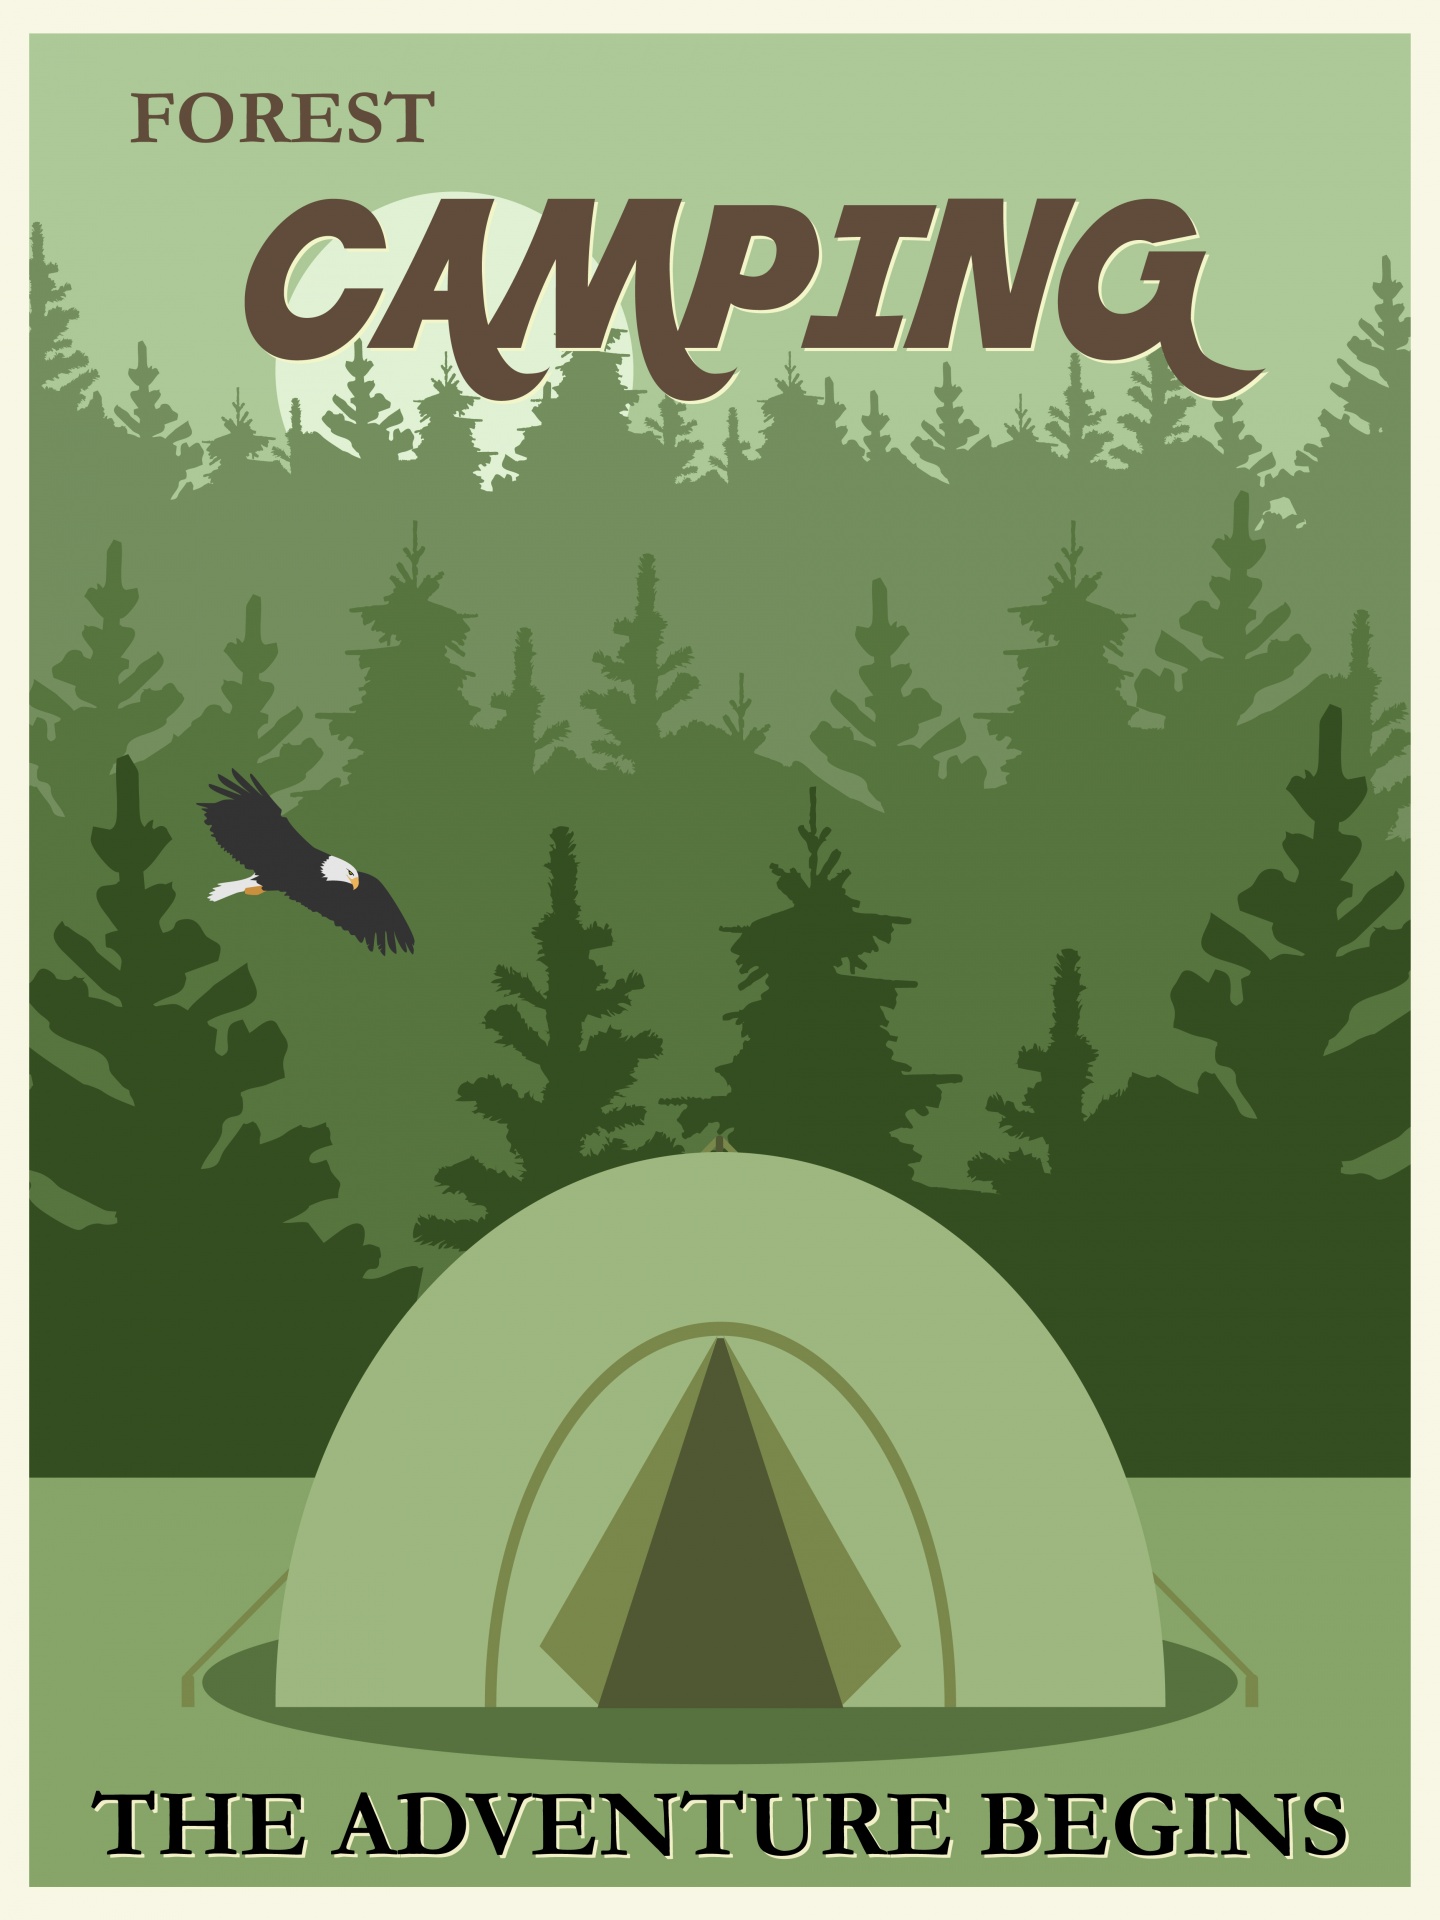 Retro, vintage style camping travel poster with pitched tent and forest background